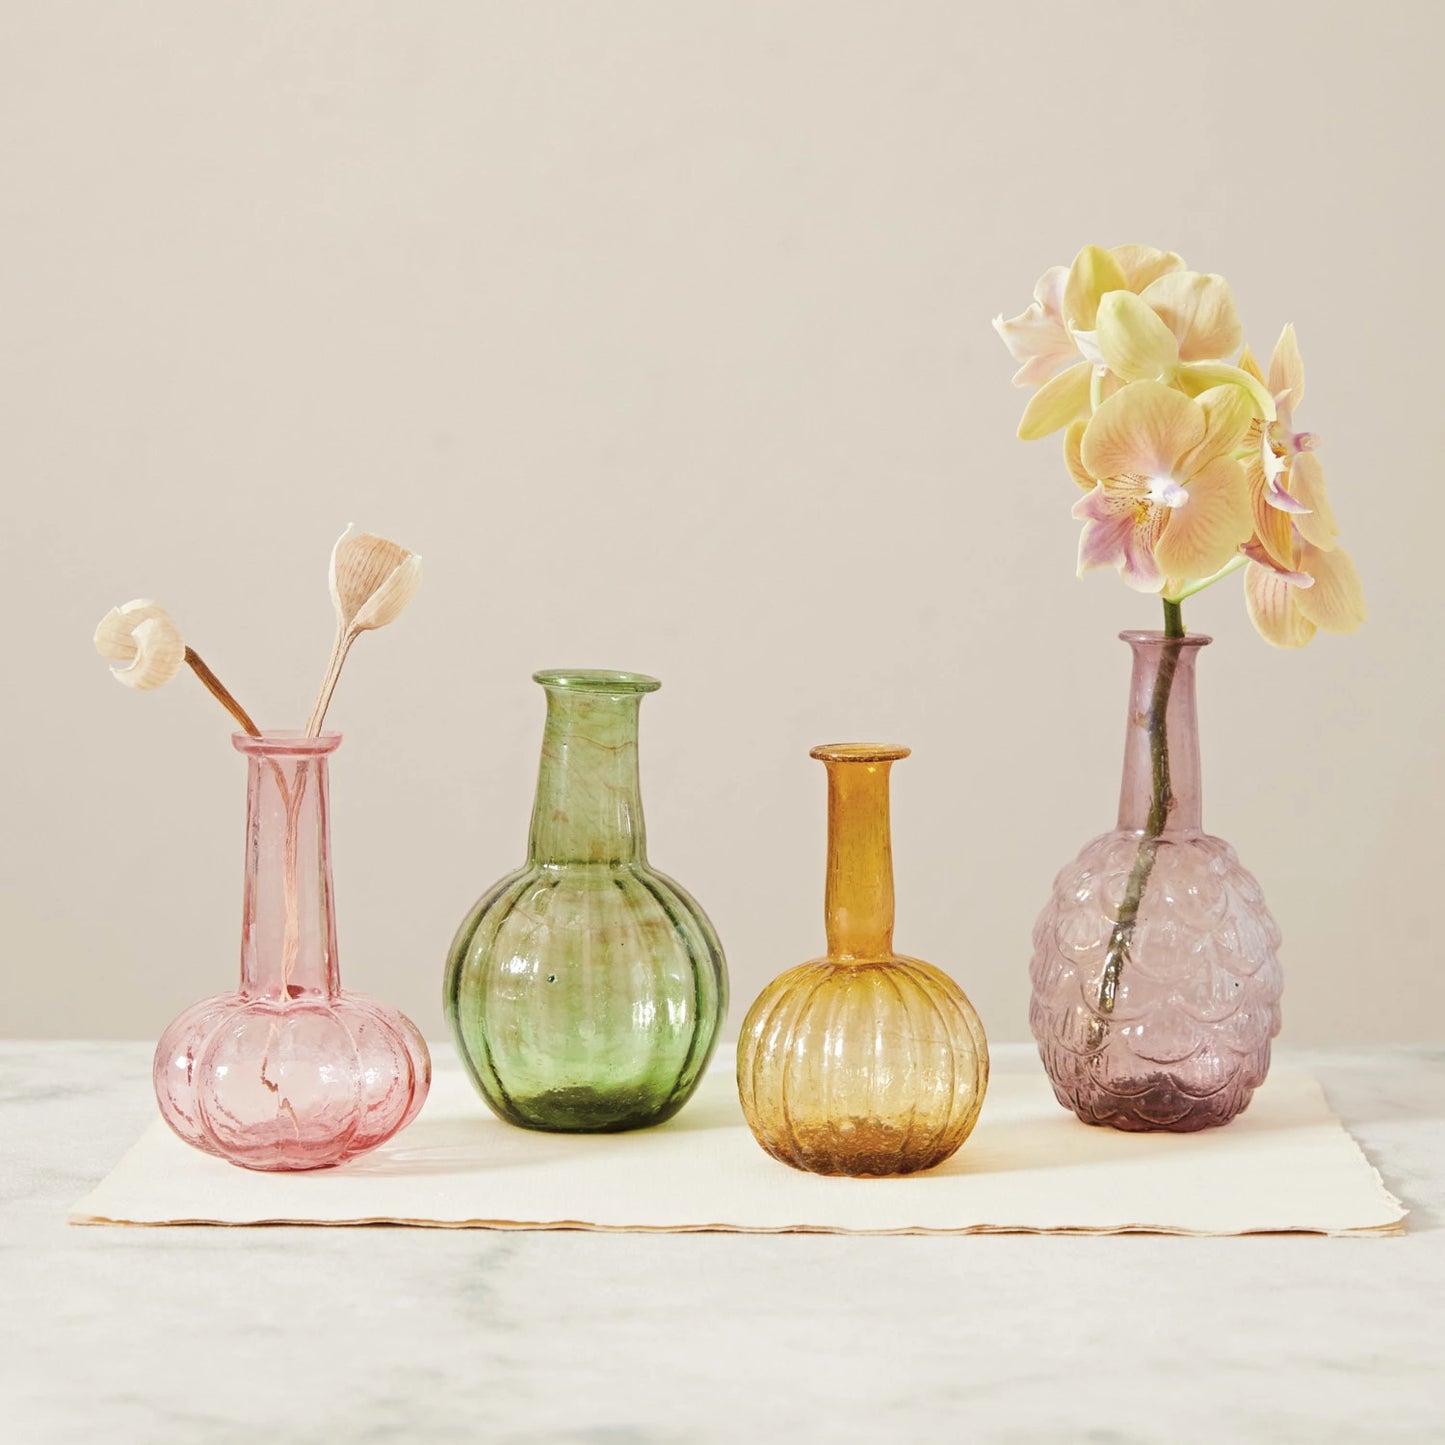 3 colors and designs of recycled glass vases on  table, 2 of them have floral in them.